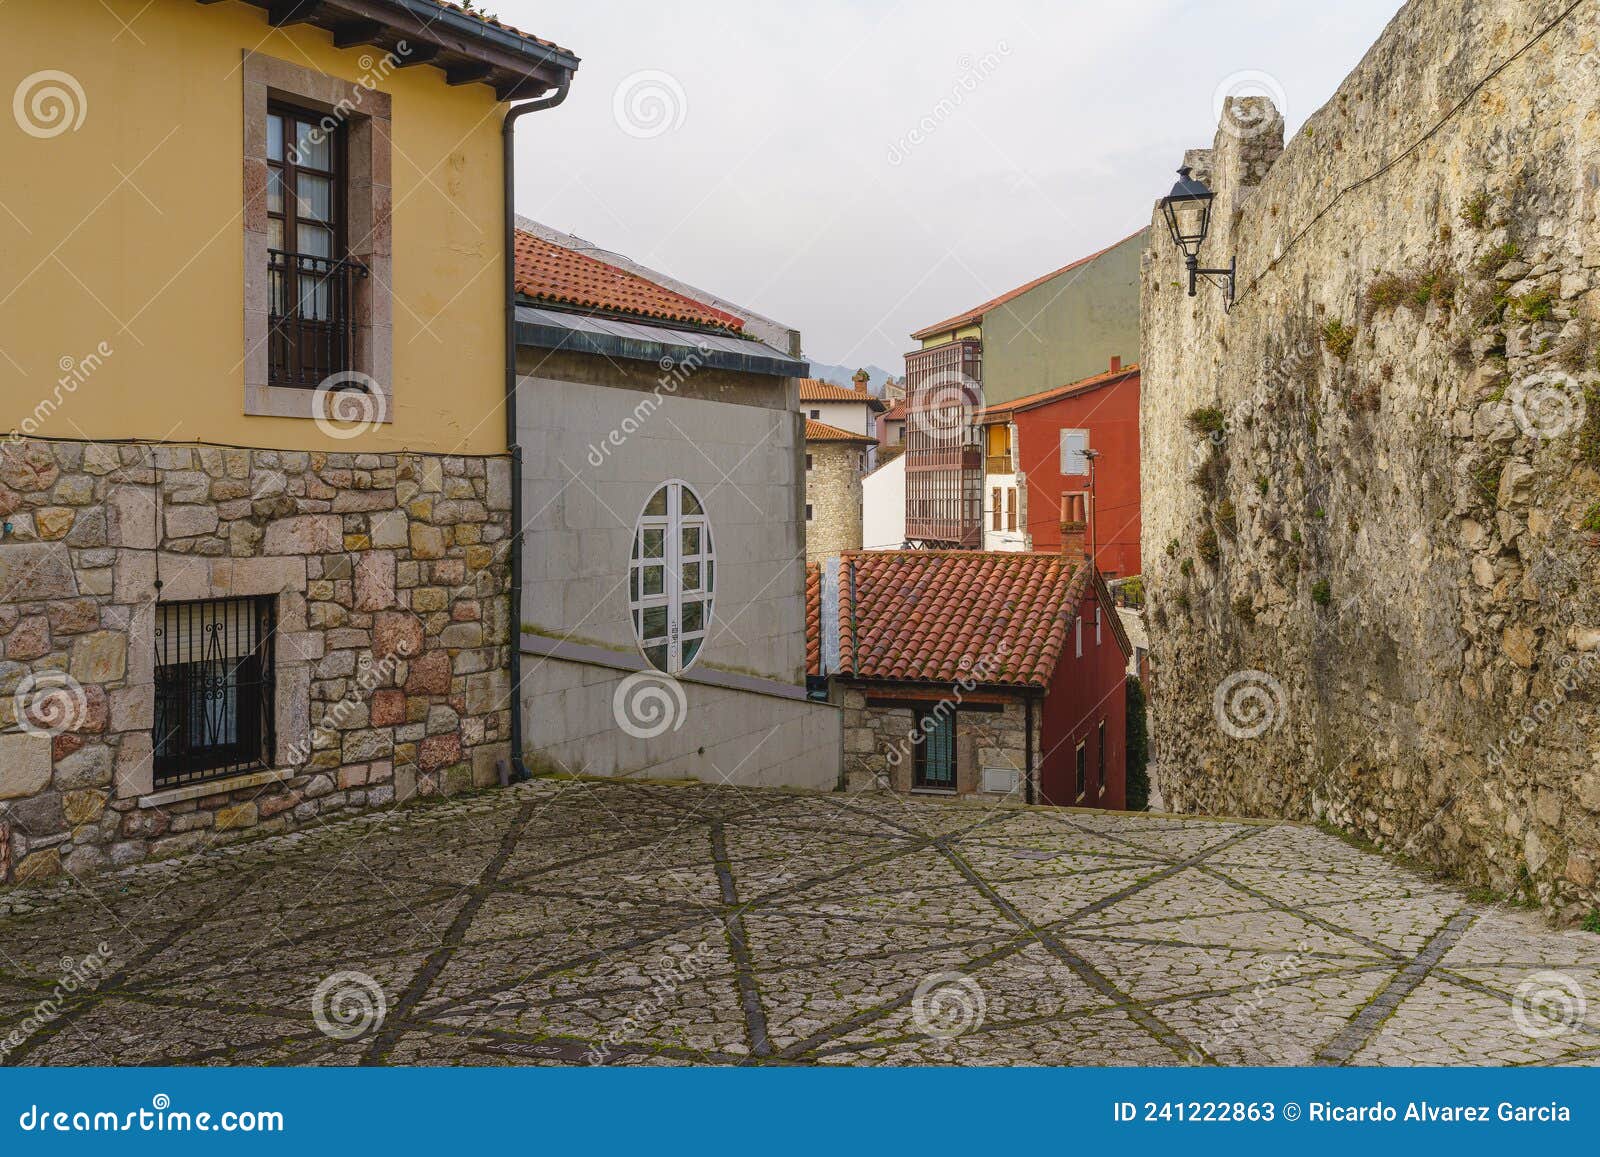 streets and buildings of the tourist town of llanes, in asturias, spain.